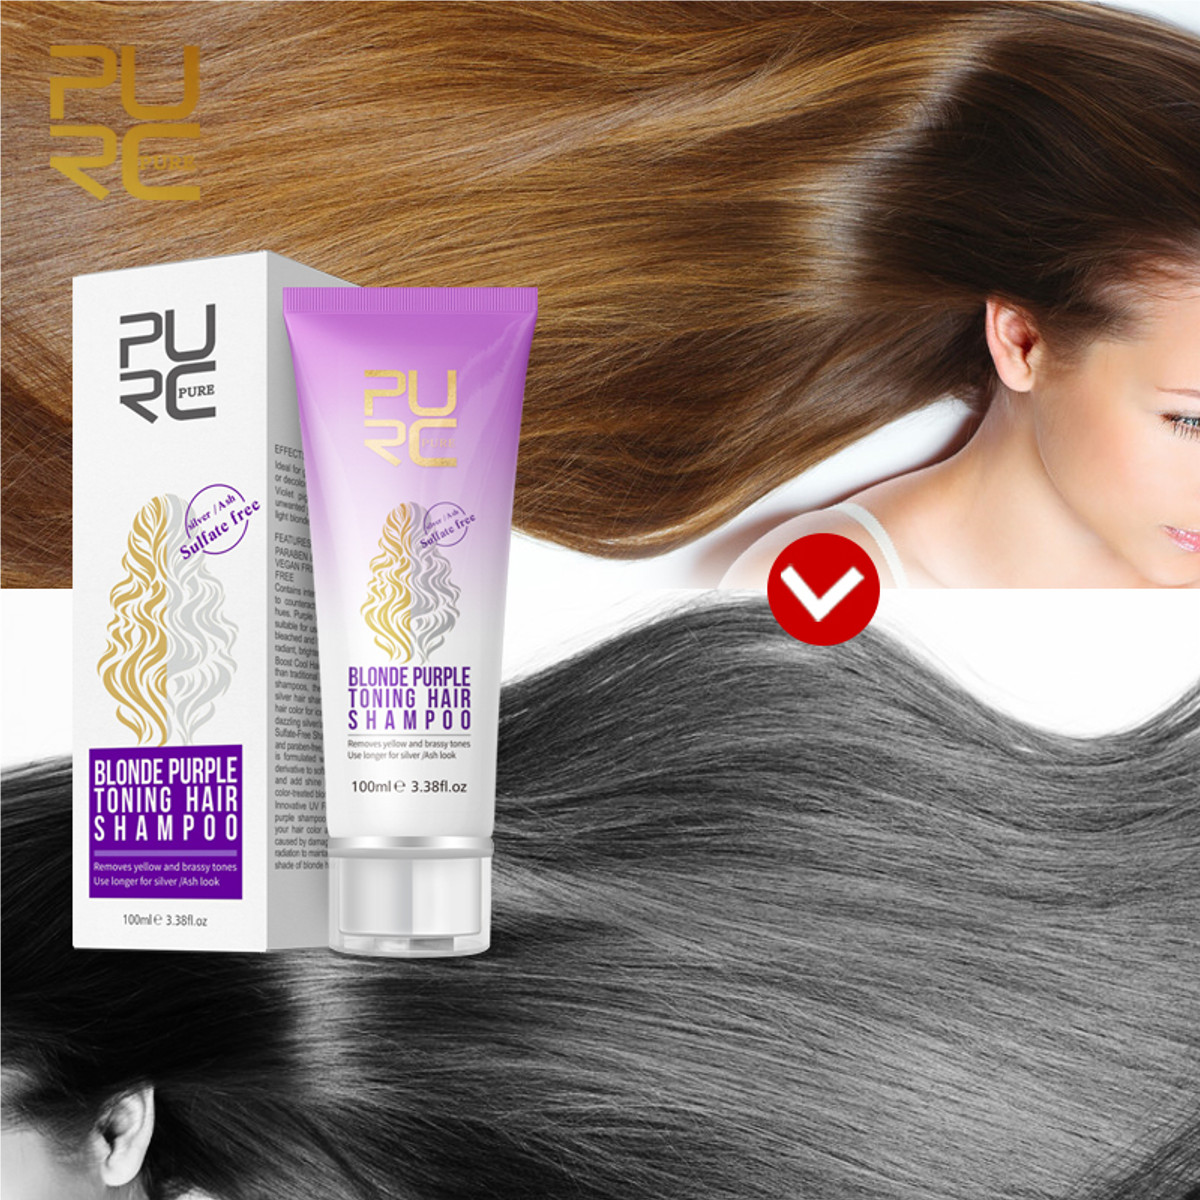 Blonde Purple Hair Shampoo Removes Yellow And Brassy Tones For